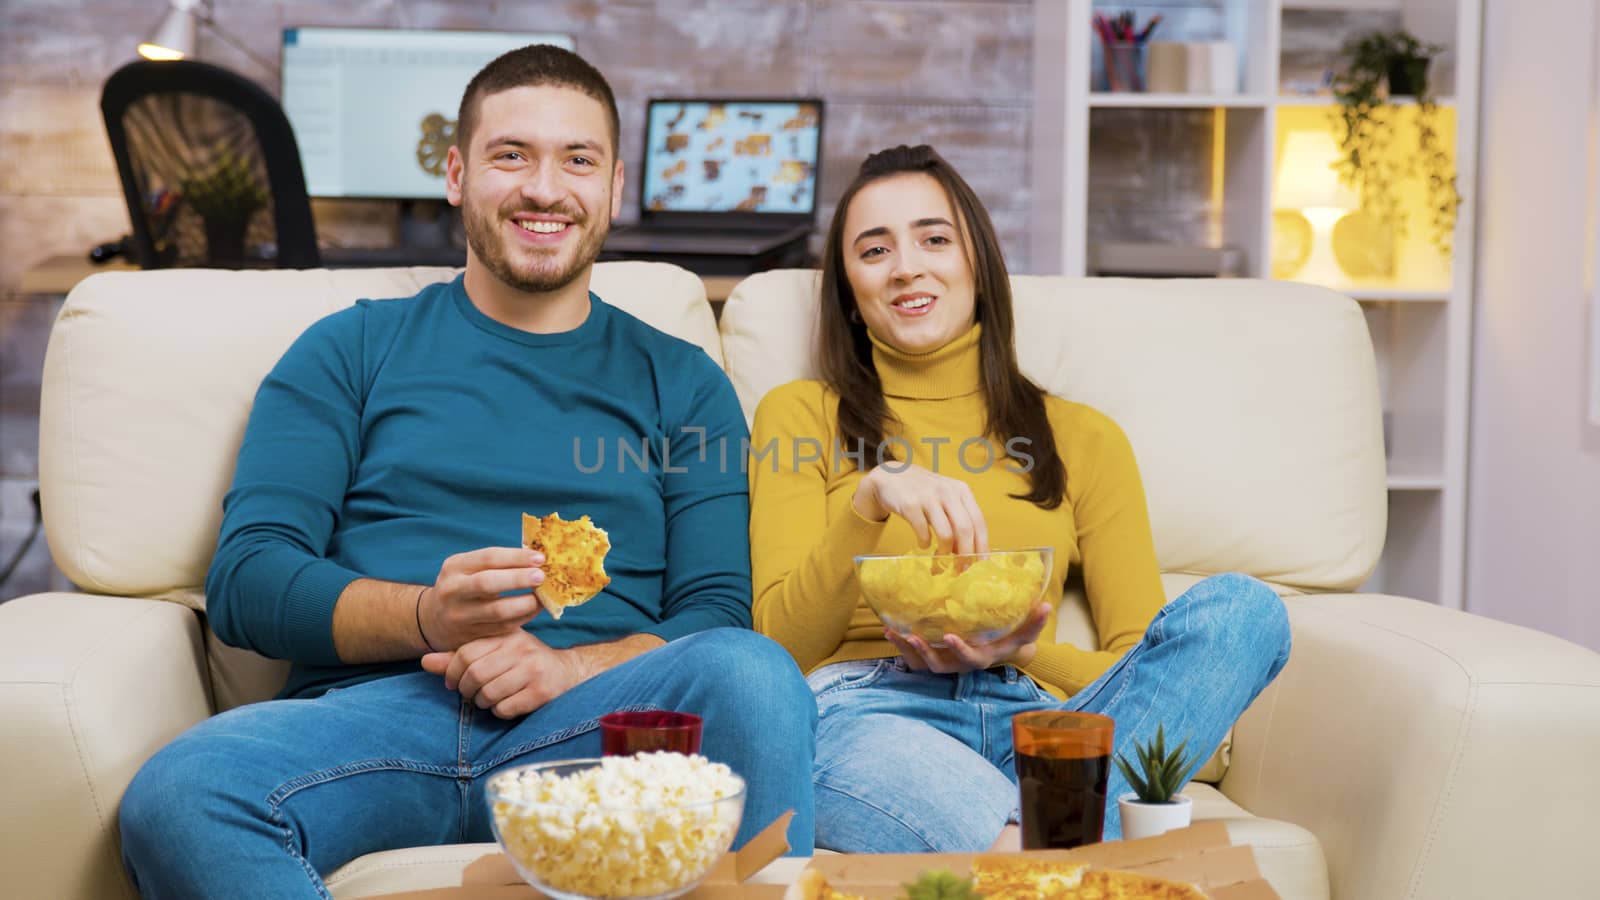 Cheerful bearded man laughing while watching a movie with his girlfriend and eating pizza. Popcorn and soda on coffee table.